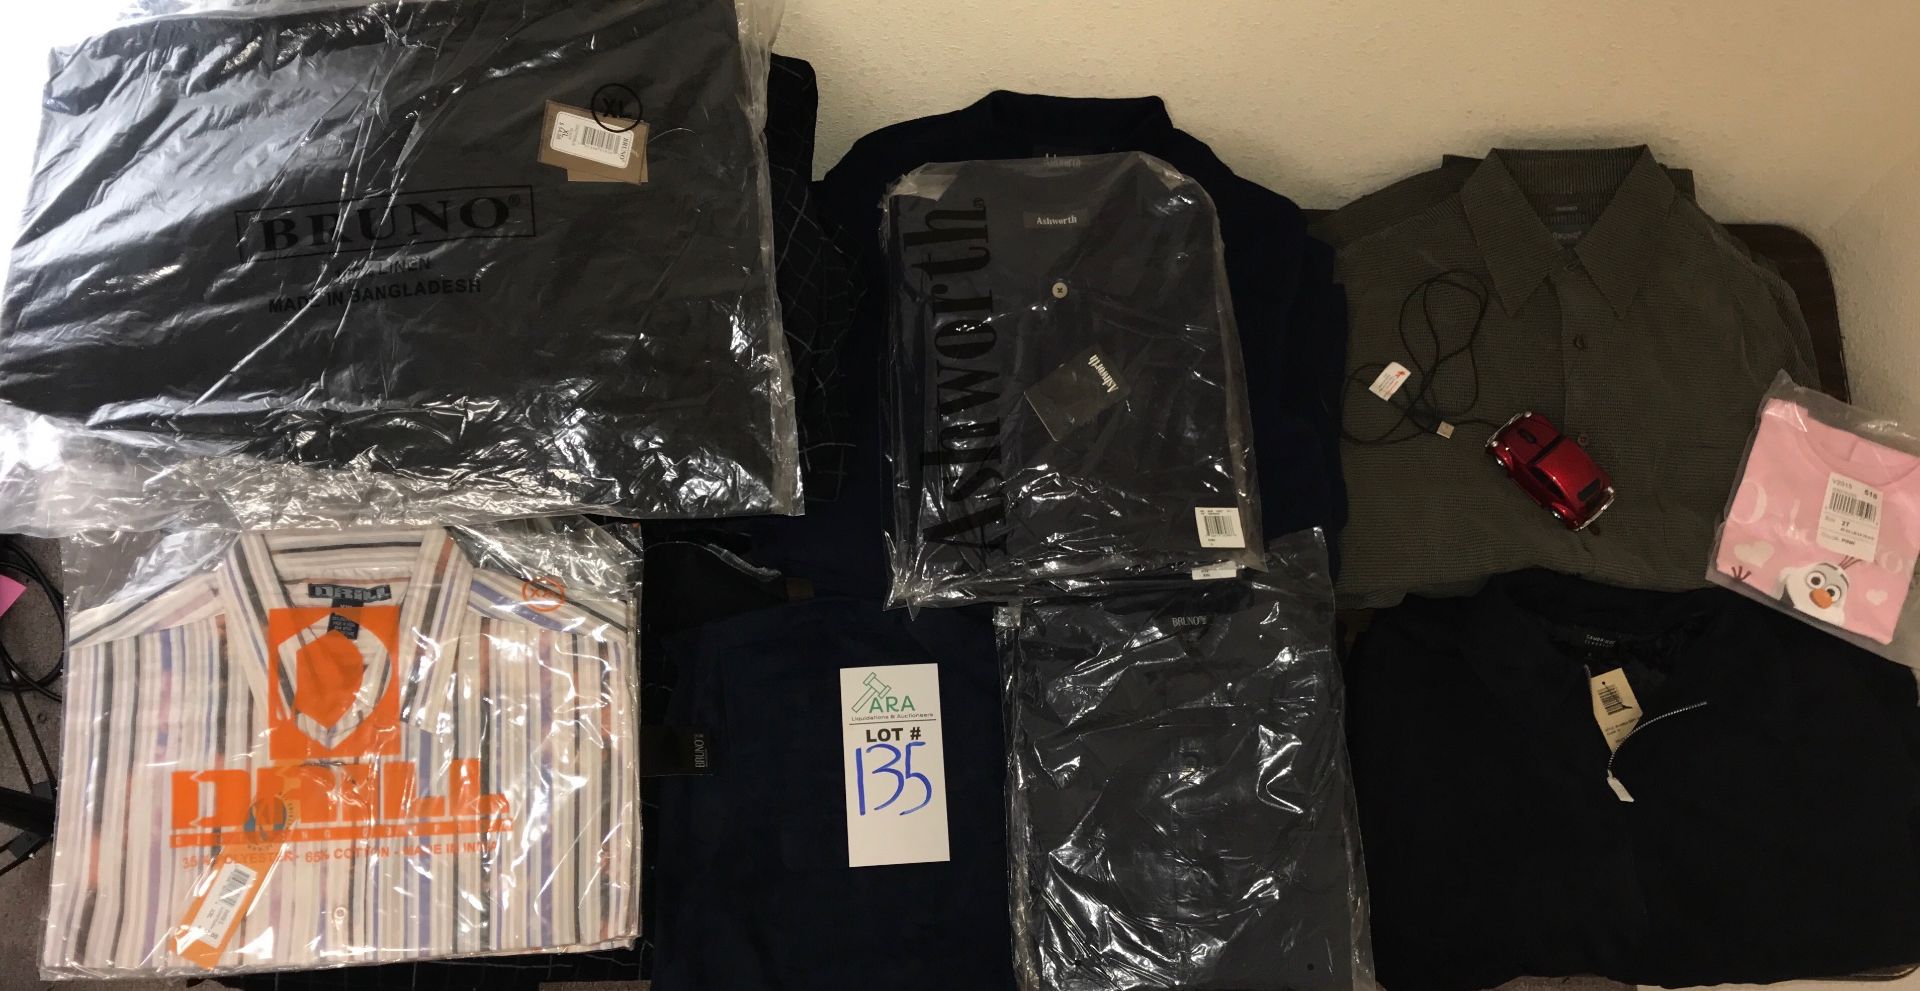 43 PIECES CLOTHING BRAND NEW, MENS COATS, SHIRTS ETC - Image 2 of 2